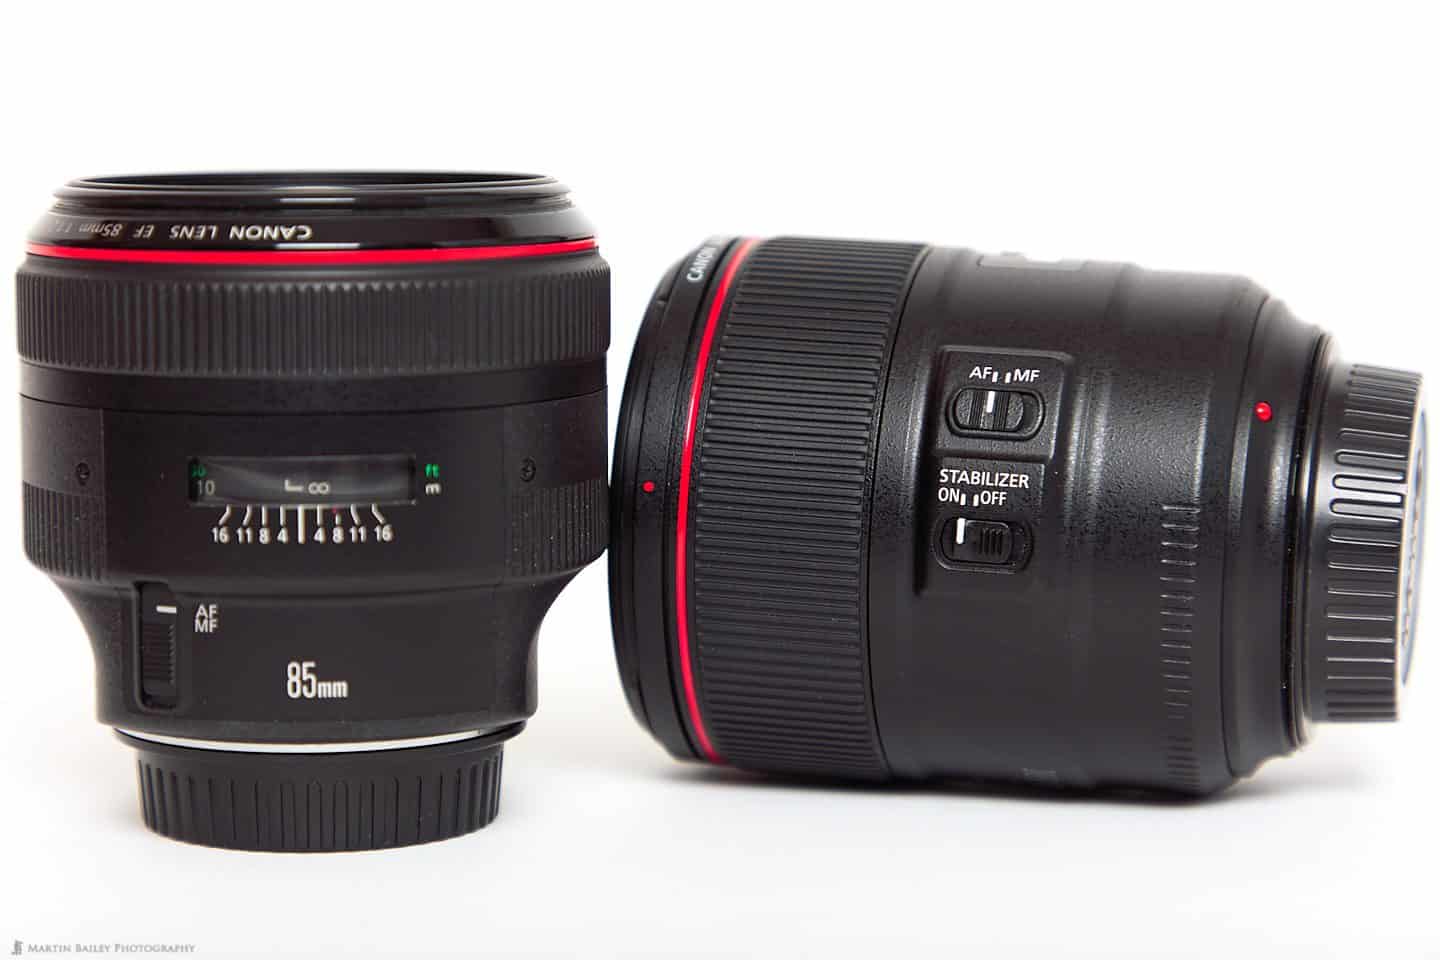 Canon EF 85mm f/1.4L IS Lens (right)